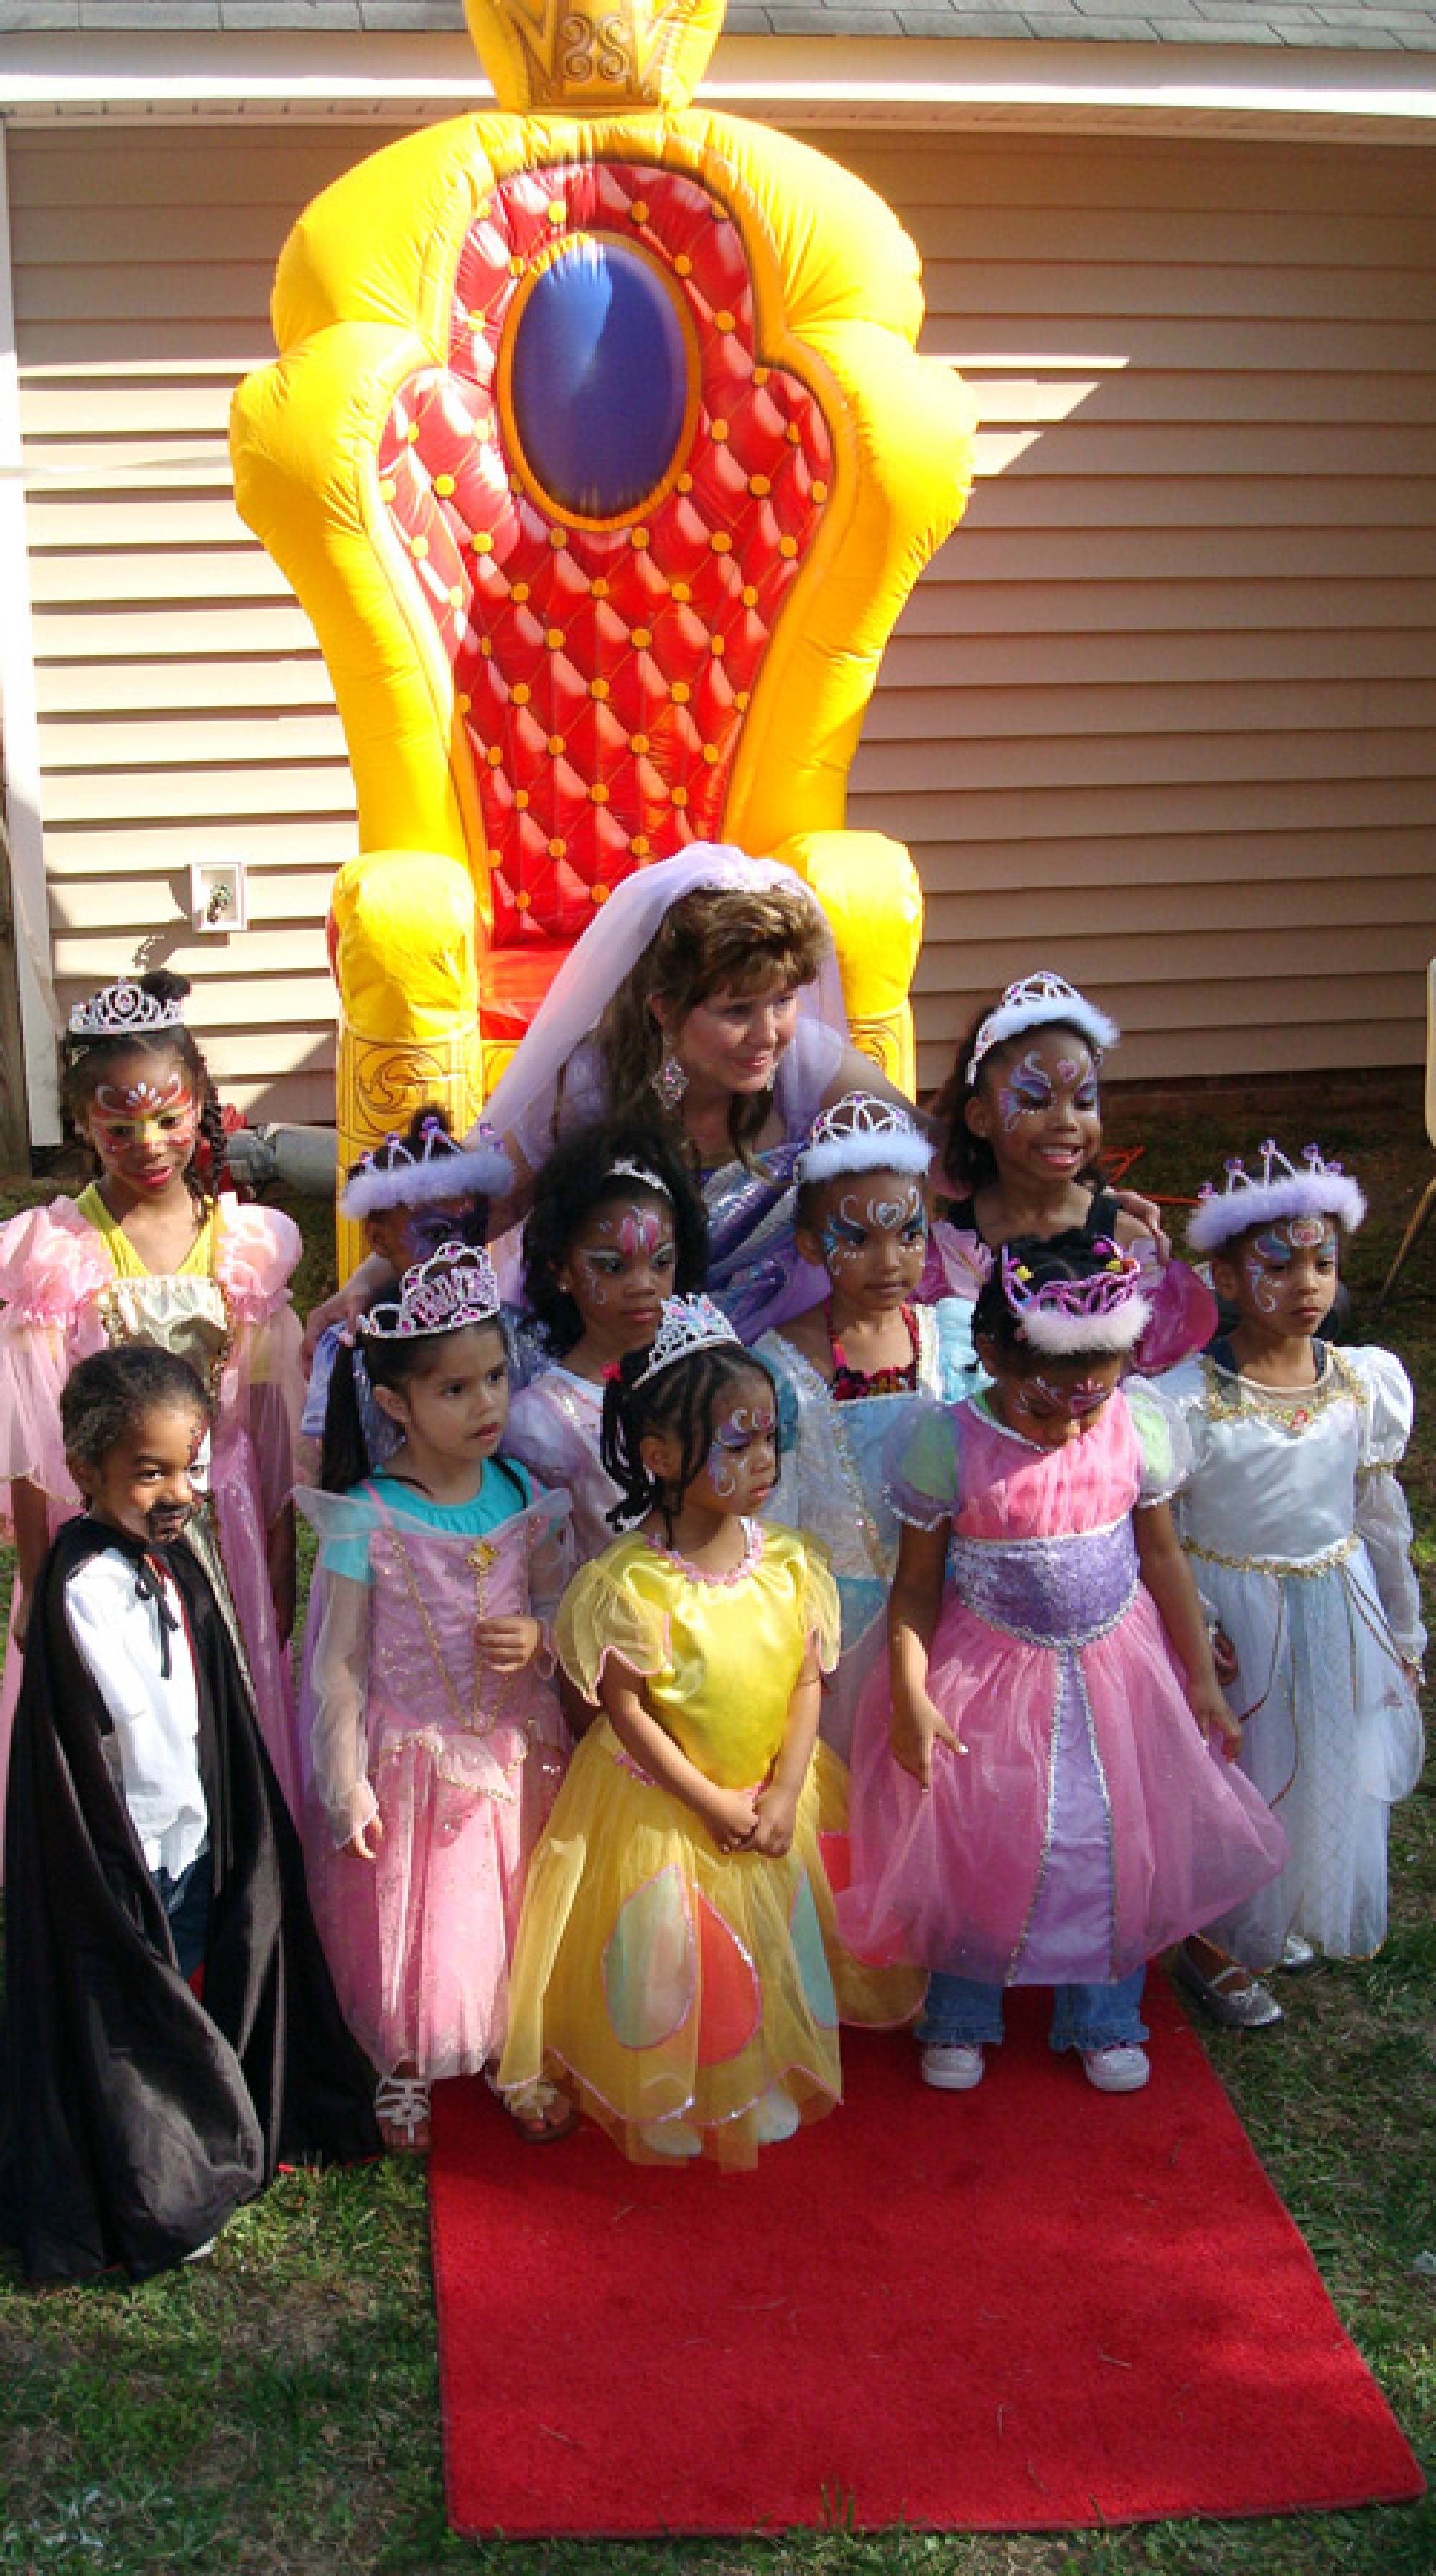 Princess party with throne chair rental